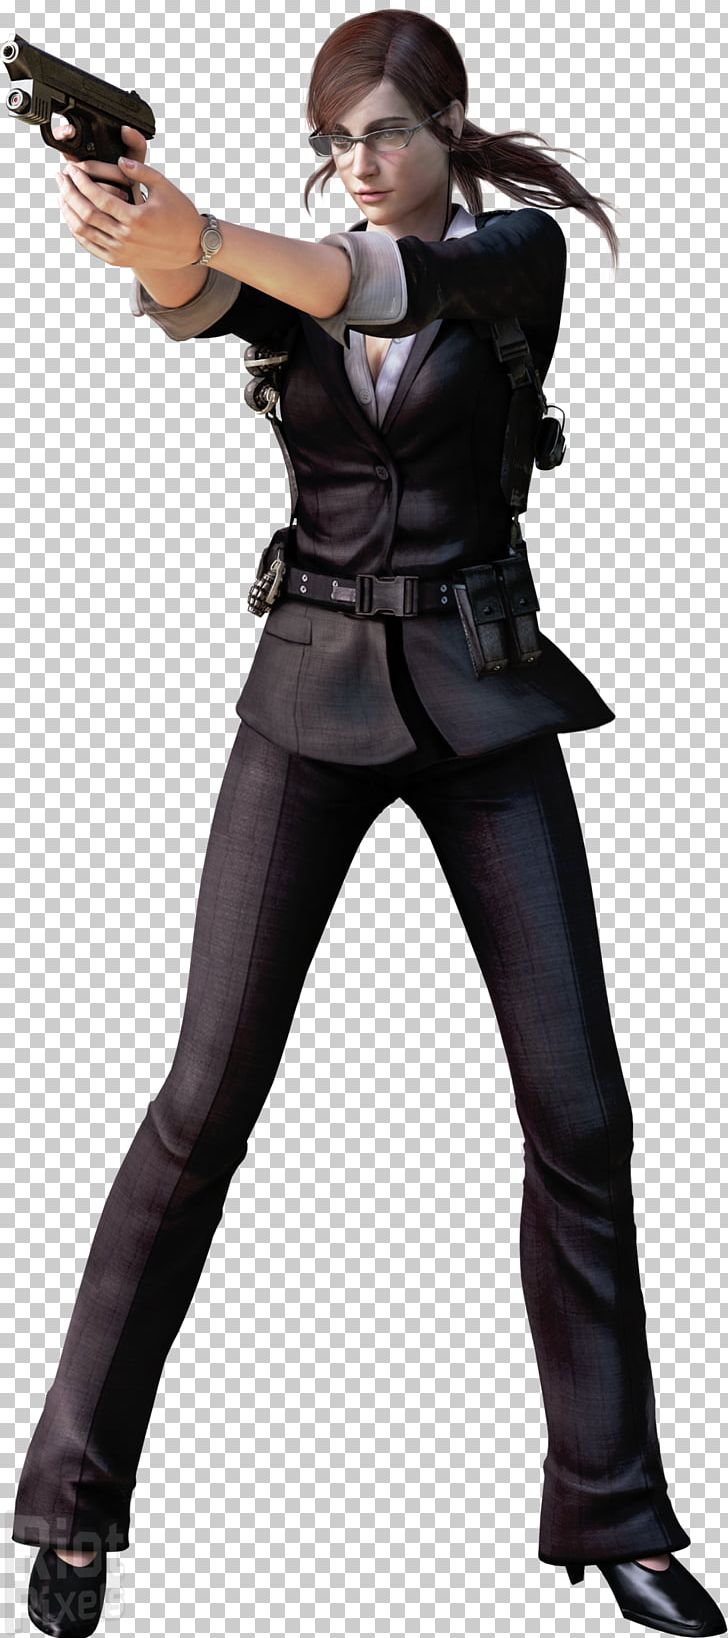 Resident Evil: The Mercenaries 3D Resident Evil: Revelations Resident Evil 4 Resident Evil 5 Claire Redfield PNG, Clipart, Claire Redfield, Jill Valentine, Others, Res, Resident Evil 4 Free PNG Download